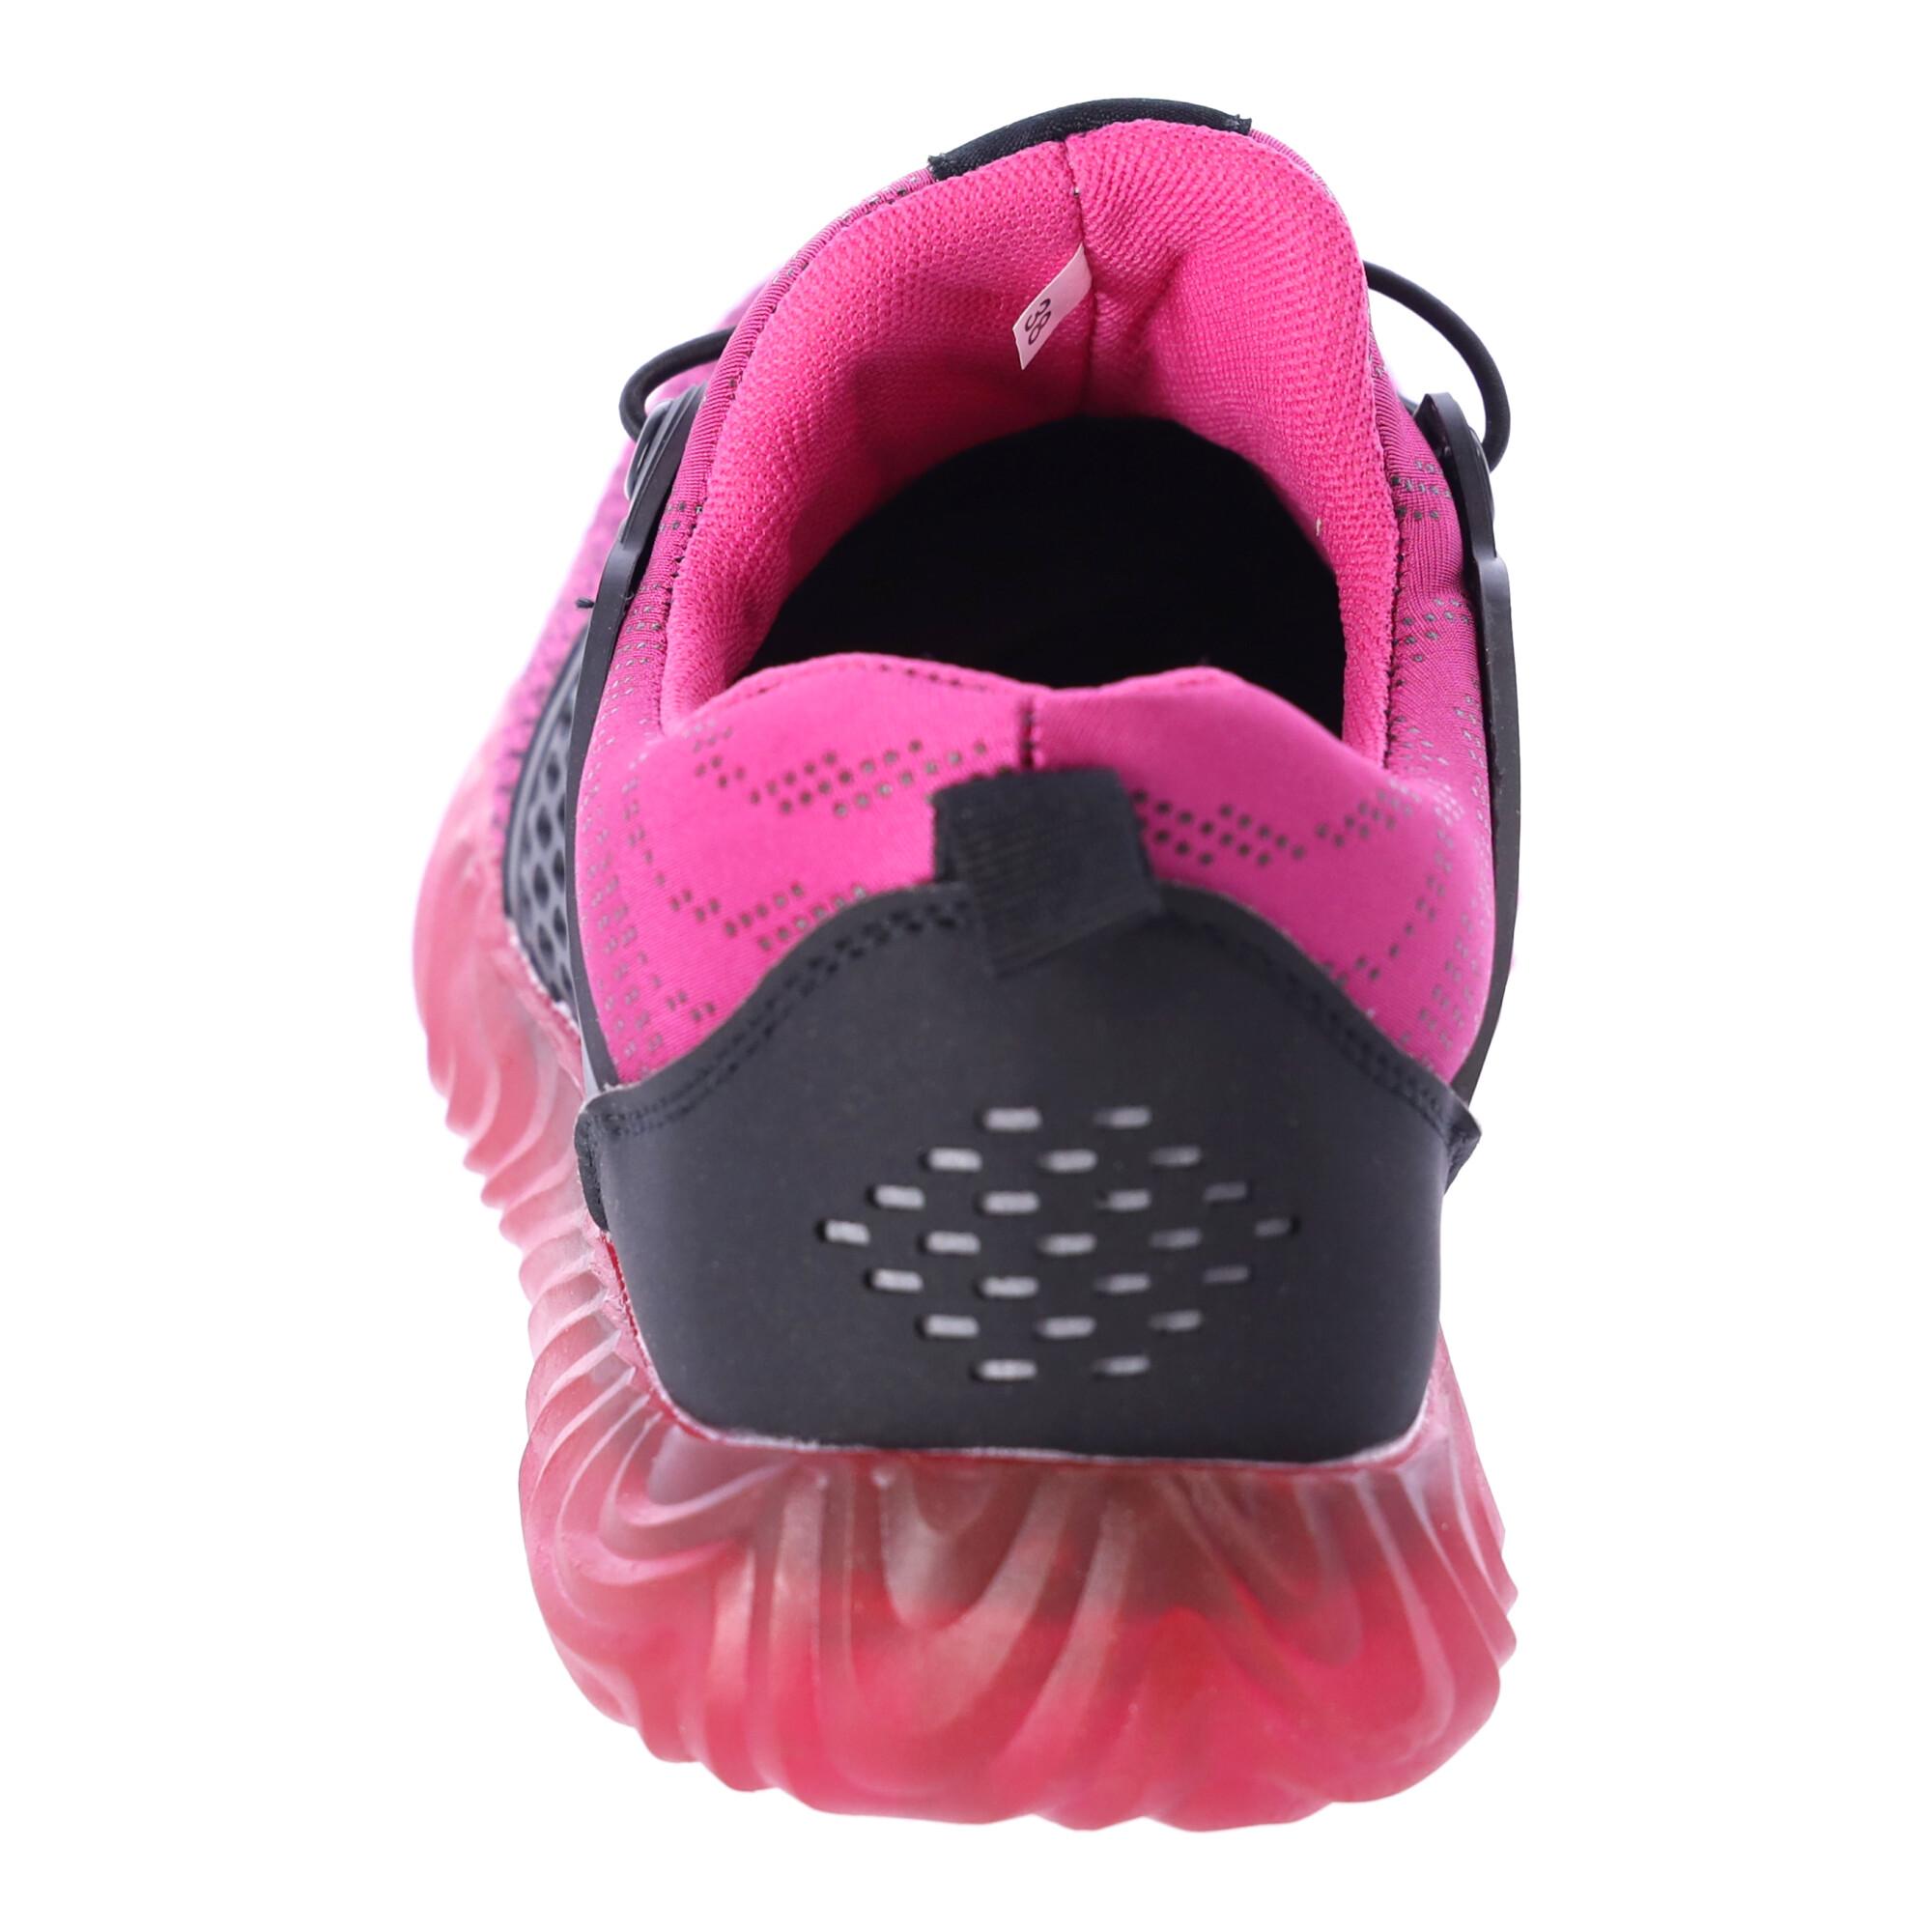 Work safety shoes "38" - pink